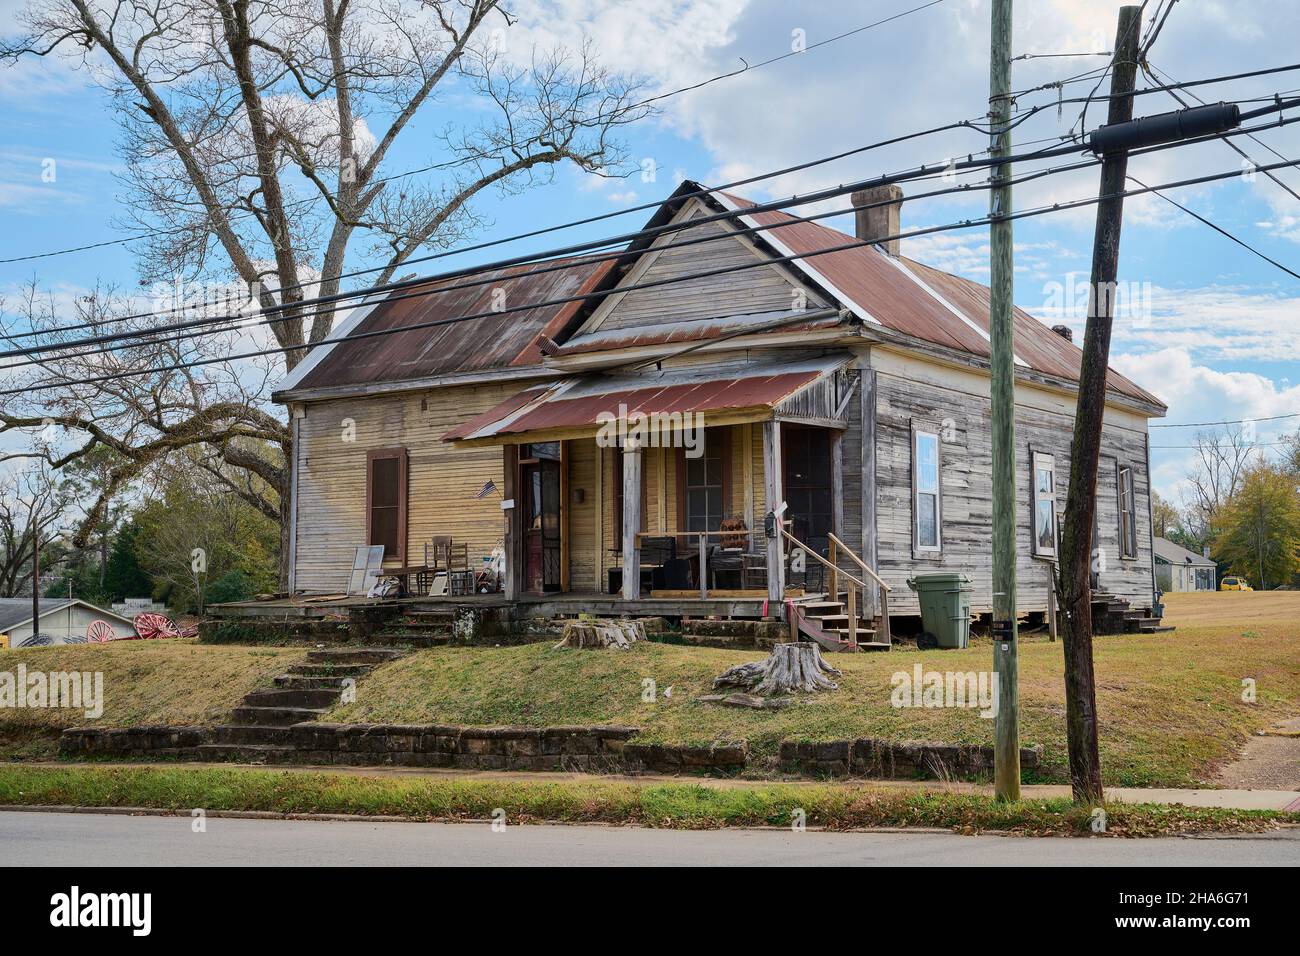 Old house or home in old an neighborhood in Greenville Alabama, USA. Stock Photo